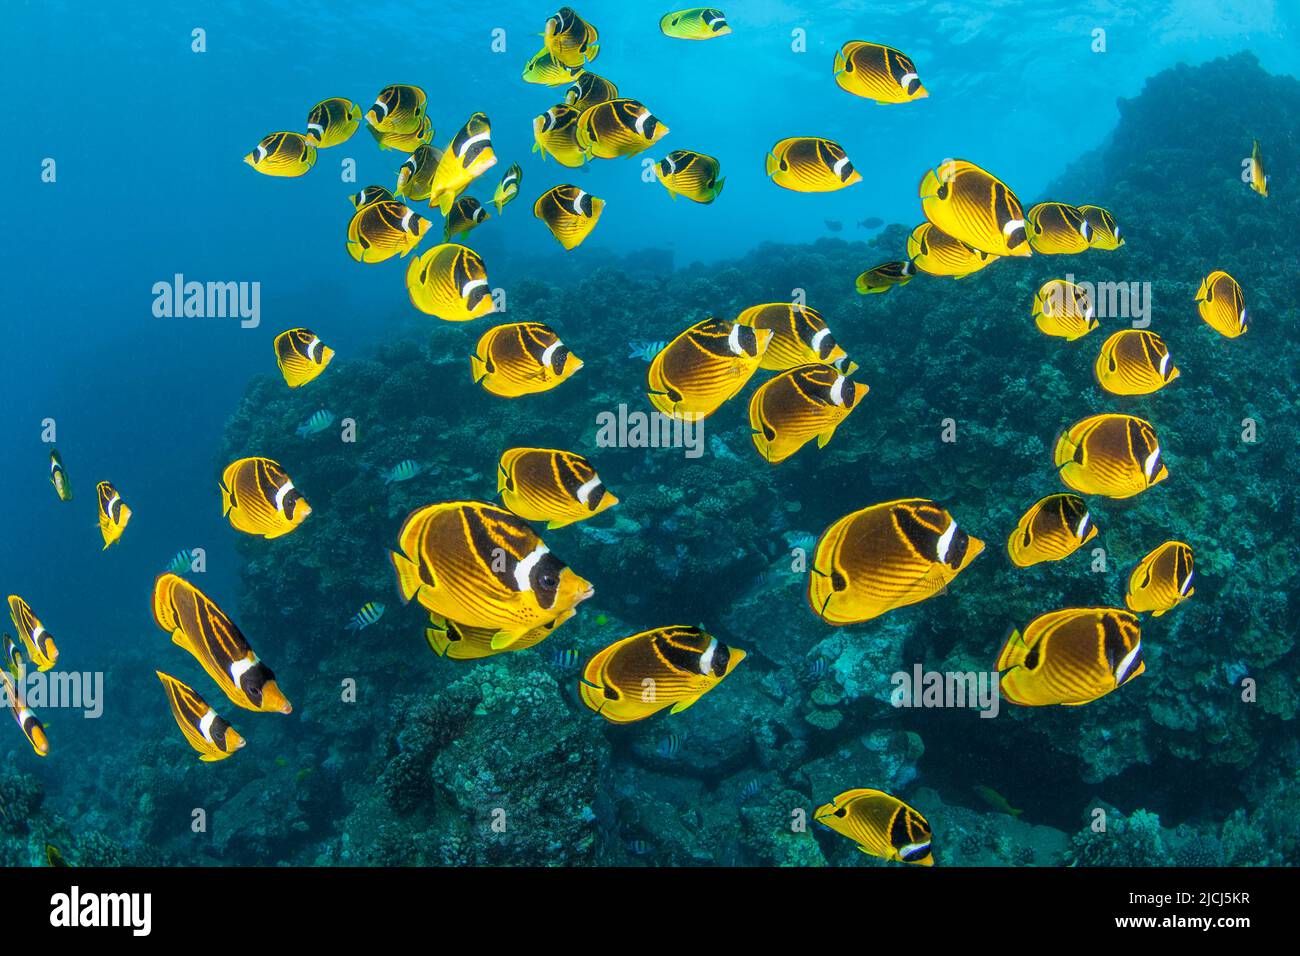 Raccoon butterflyfish, Chaetodon lunula, can sometimes be found in large schools over the reef, Hawaii. Stock Photo